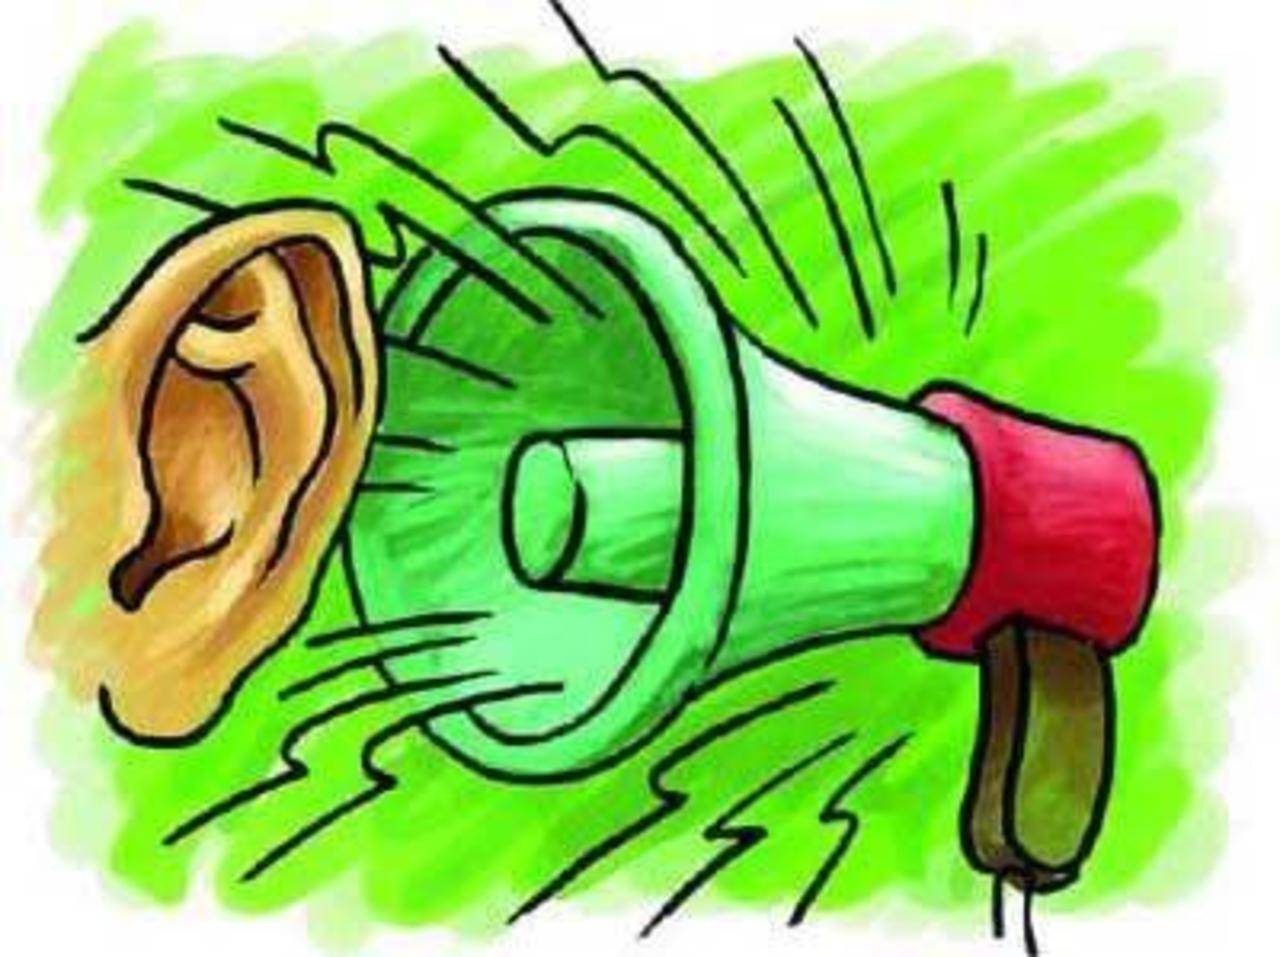 Honking, noisy gensets major causes of noise pollution in Patna ...